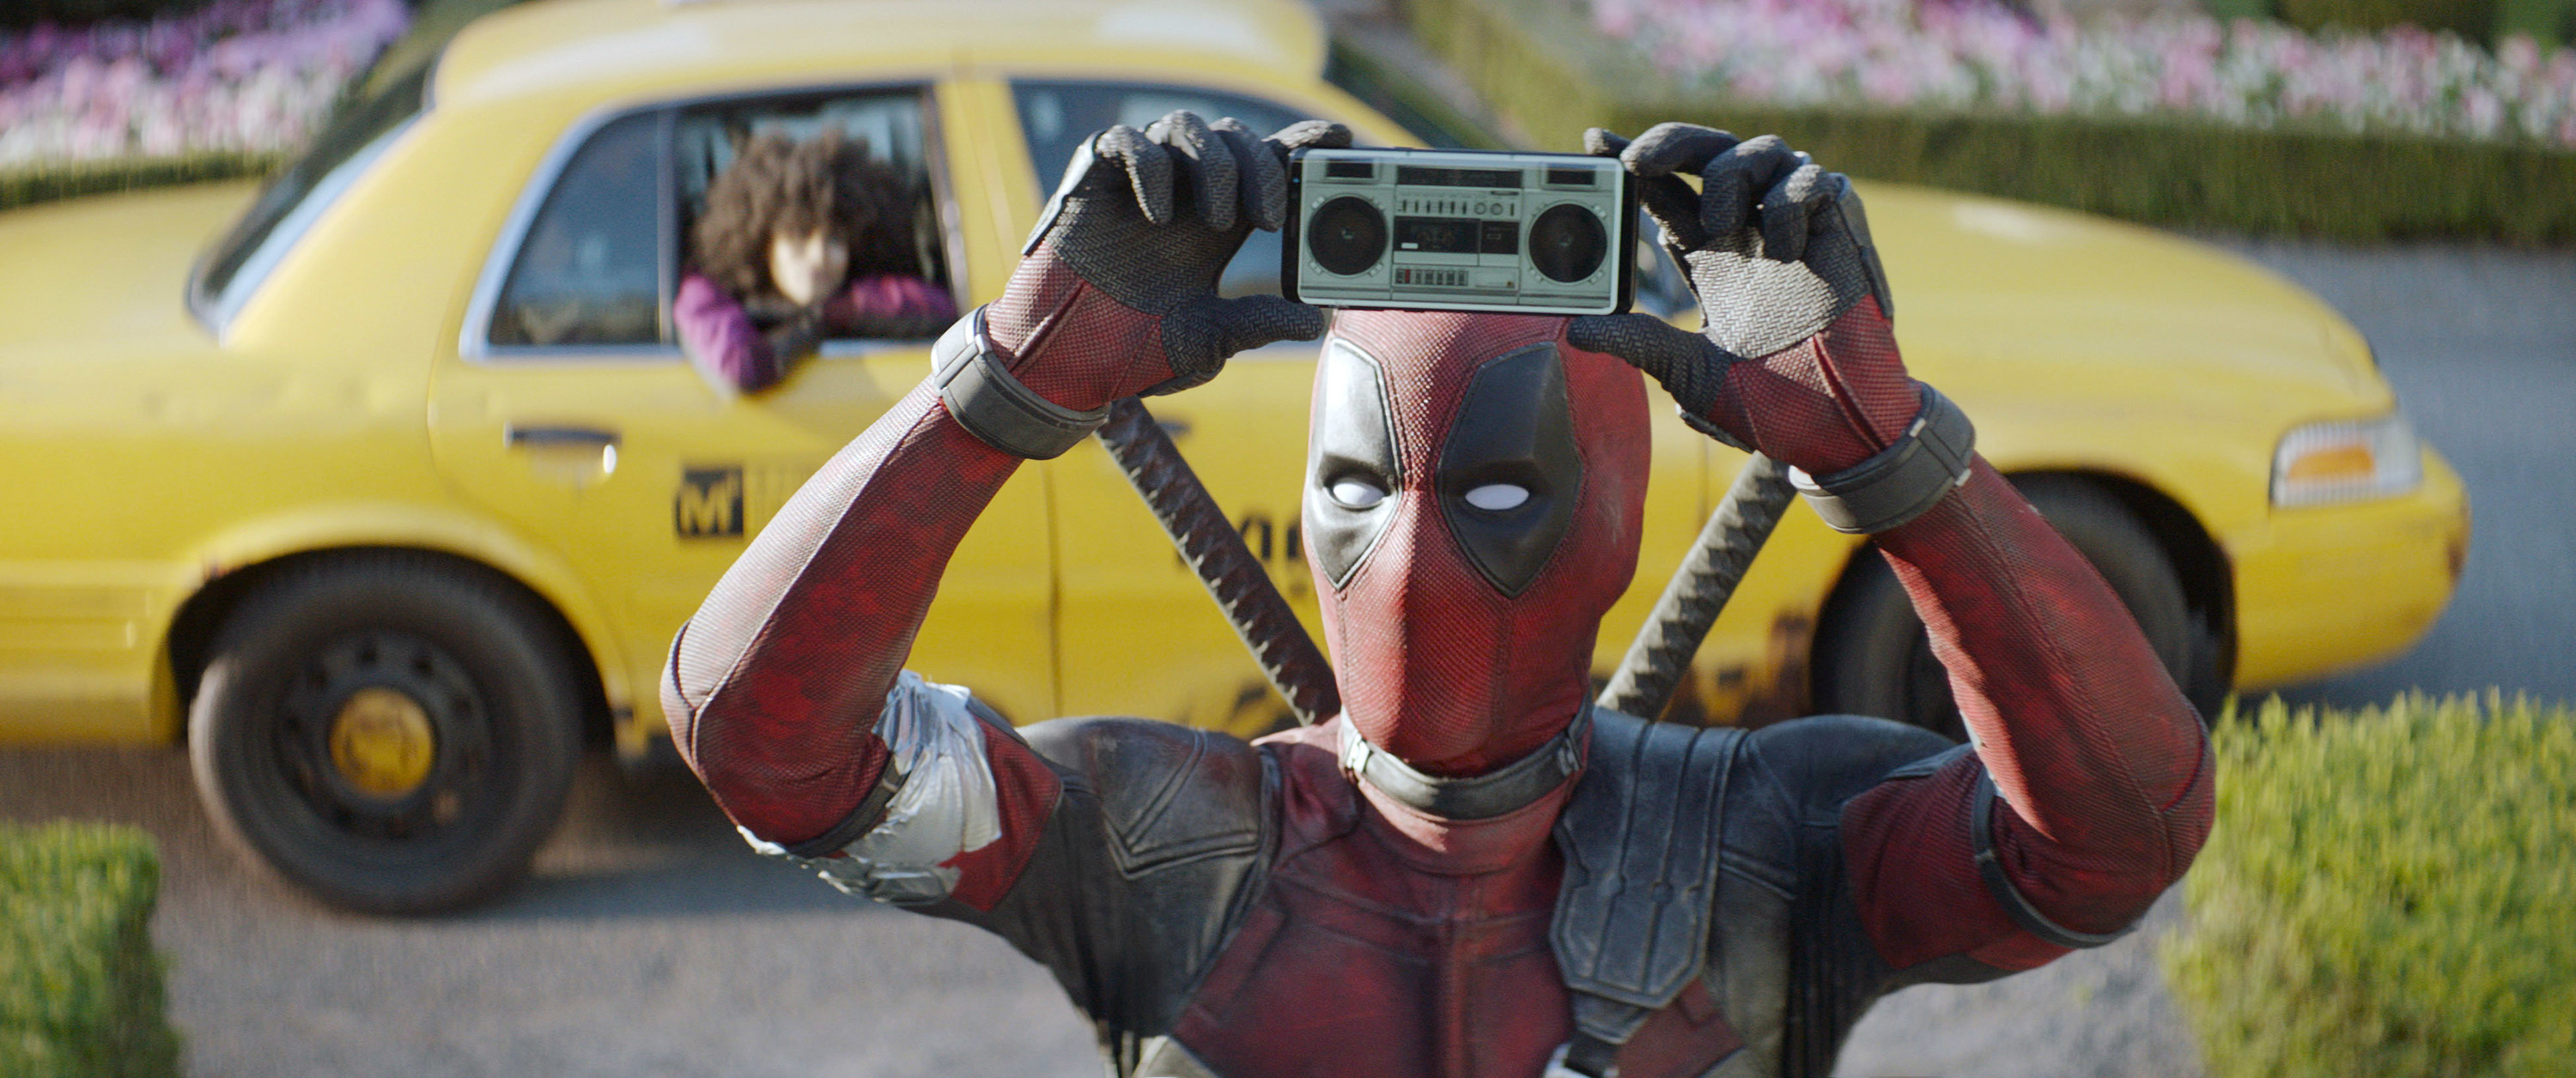 deadpool holding up a small tape deck playing music while a cab waits behind